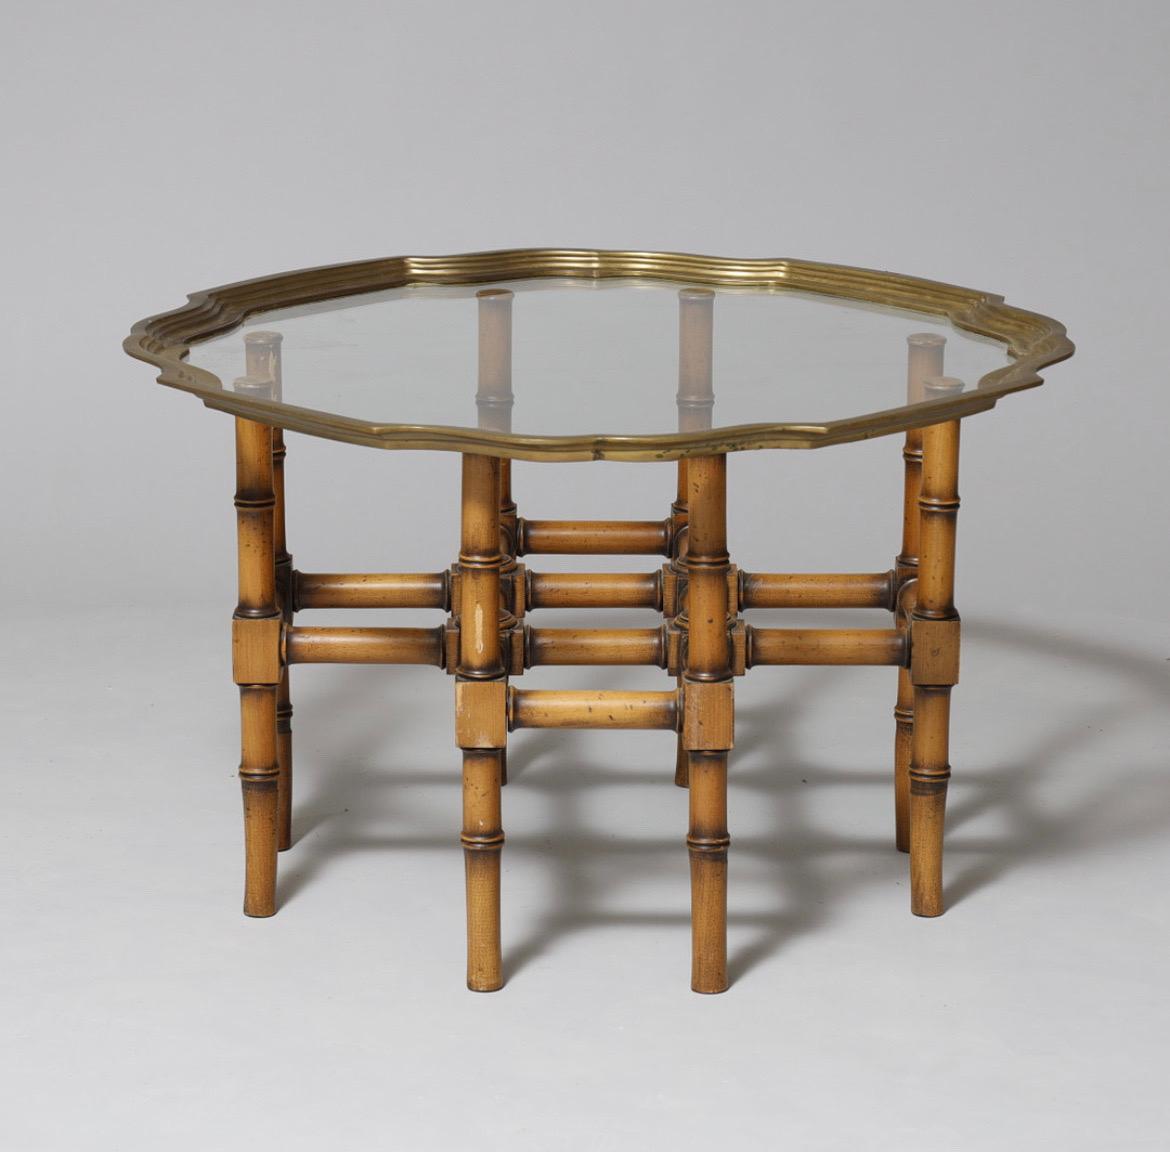 Scandinavian Modern 1960s Lysberg, Hansen & Therp Faux Bamboo Coffee Table with Profiled Brass Edge For Sale